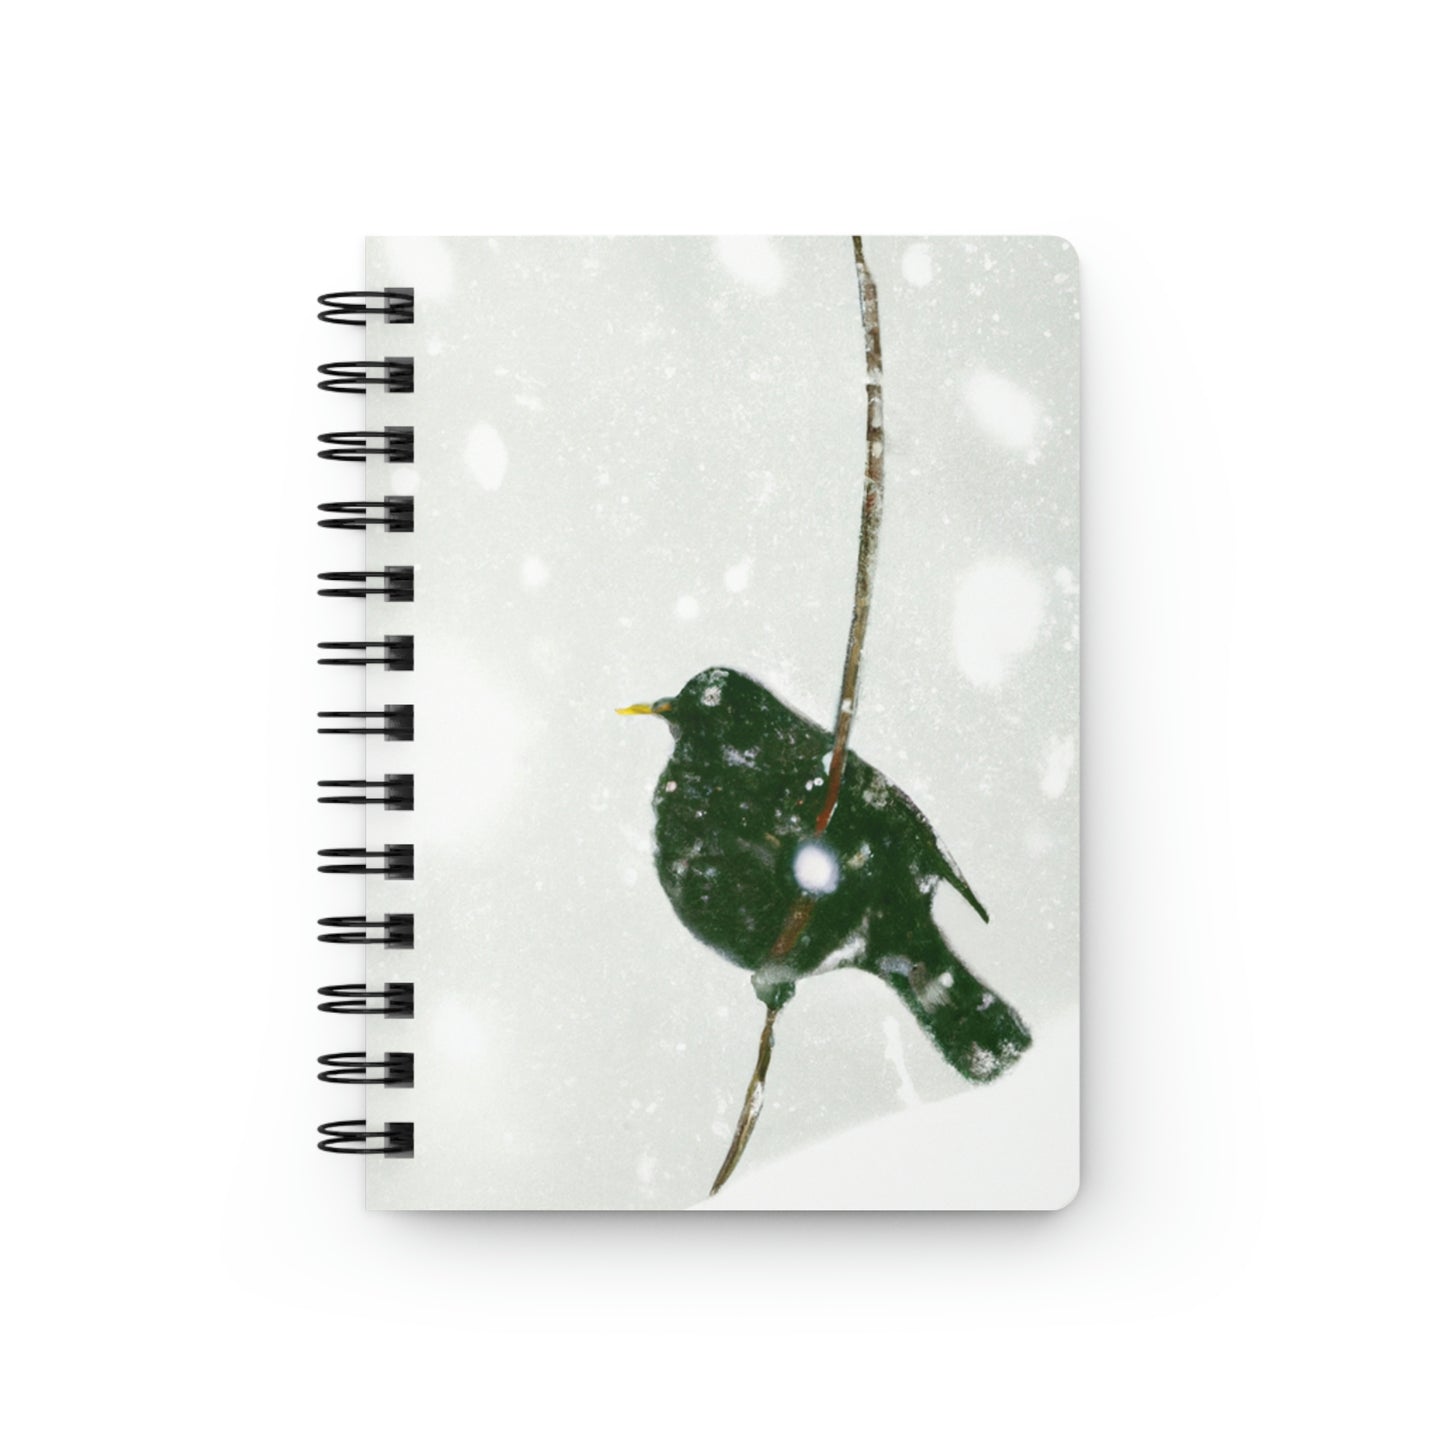 "The Solitary Nest-Builder in the Snow" - The Alien Spiral Bound Journal